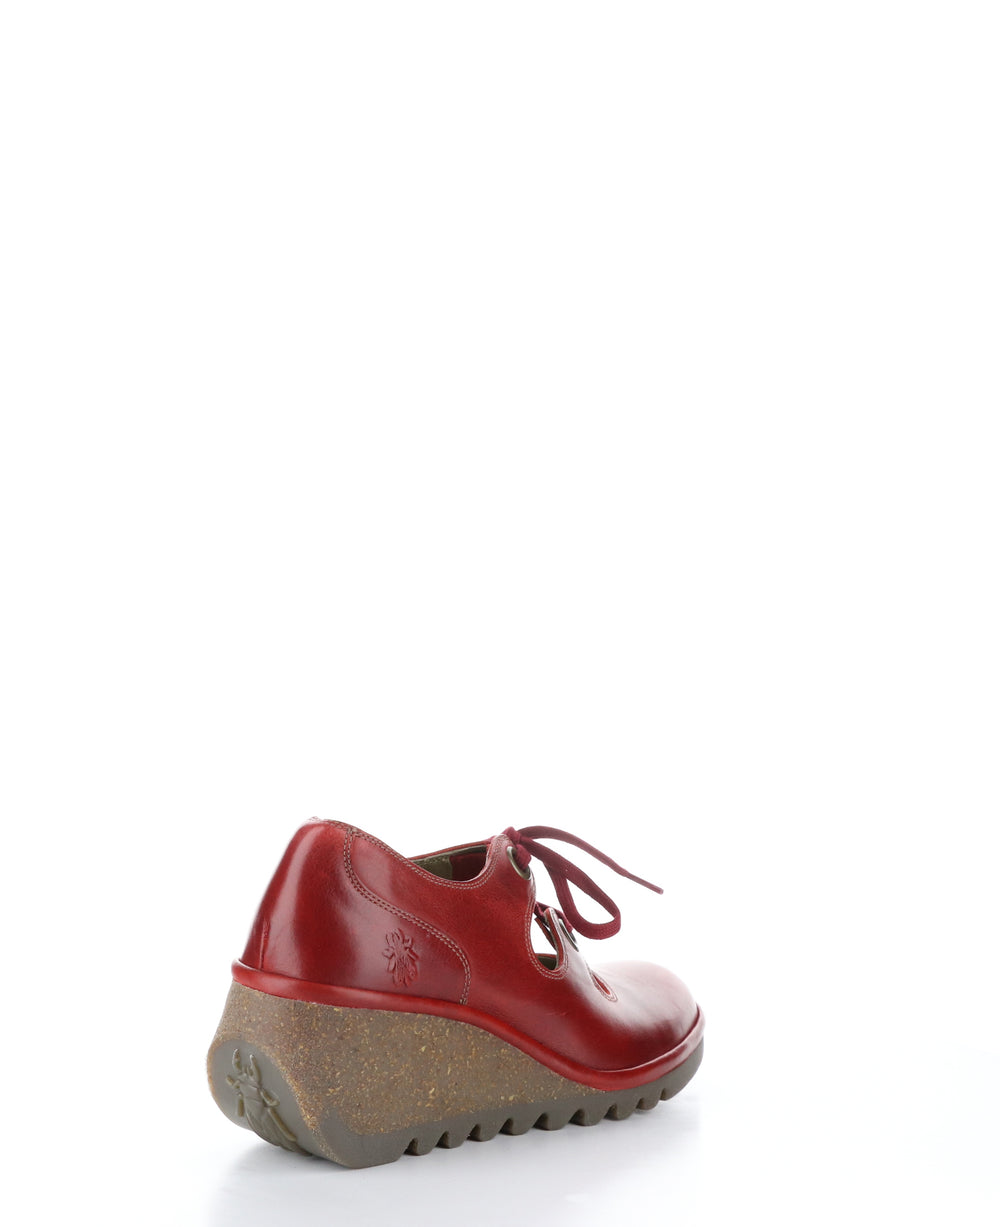 NELY337FLY Red Round Toe Shoes